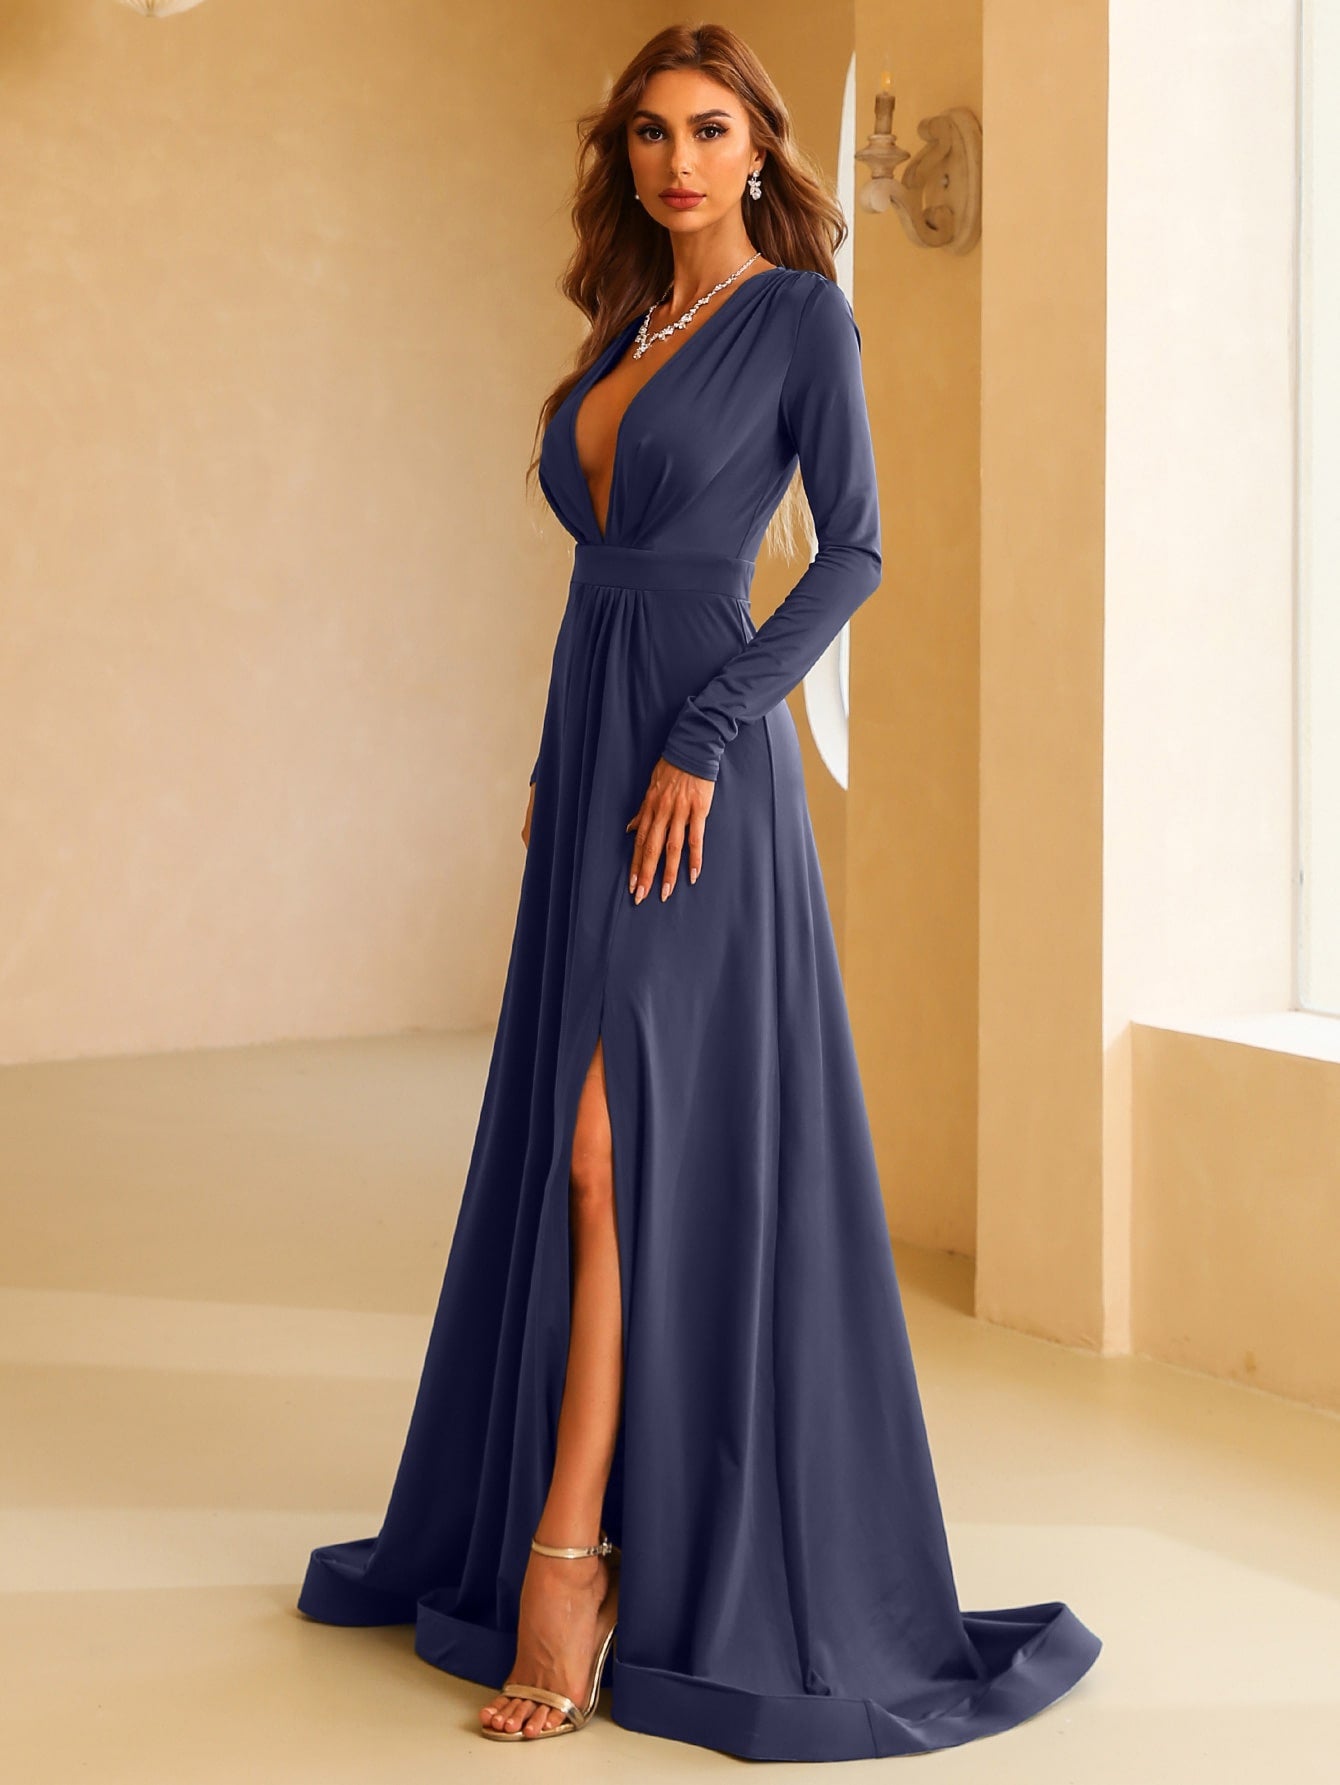 Plunging Neck Dress with slit